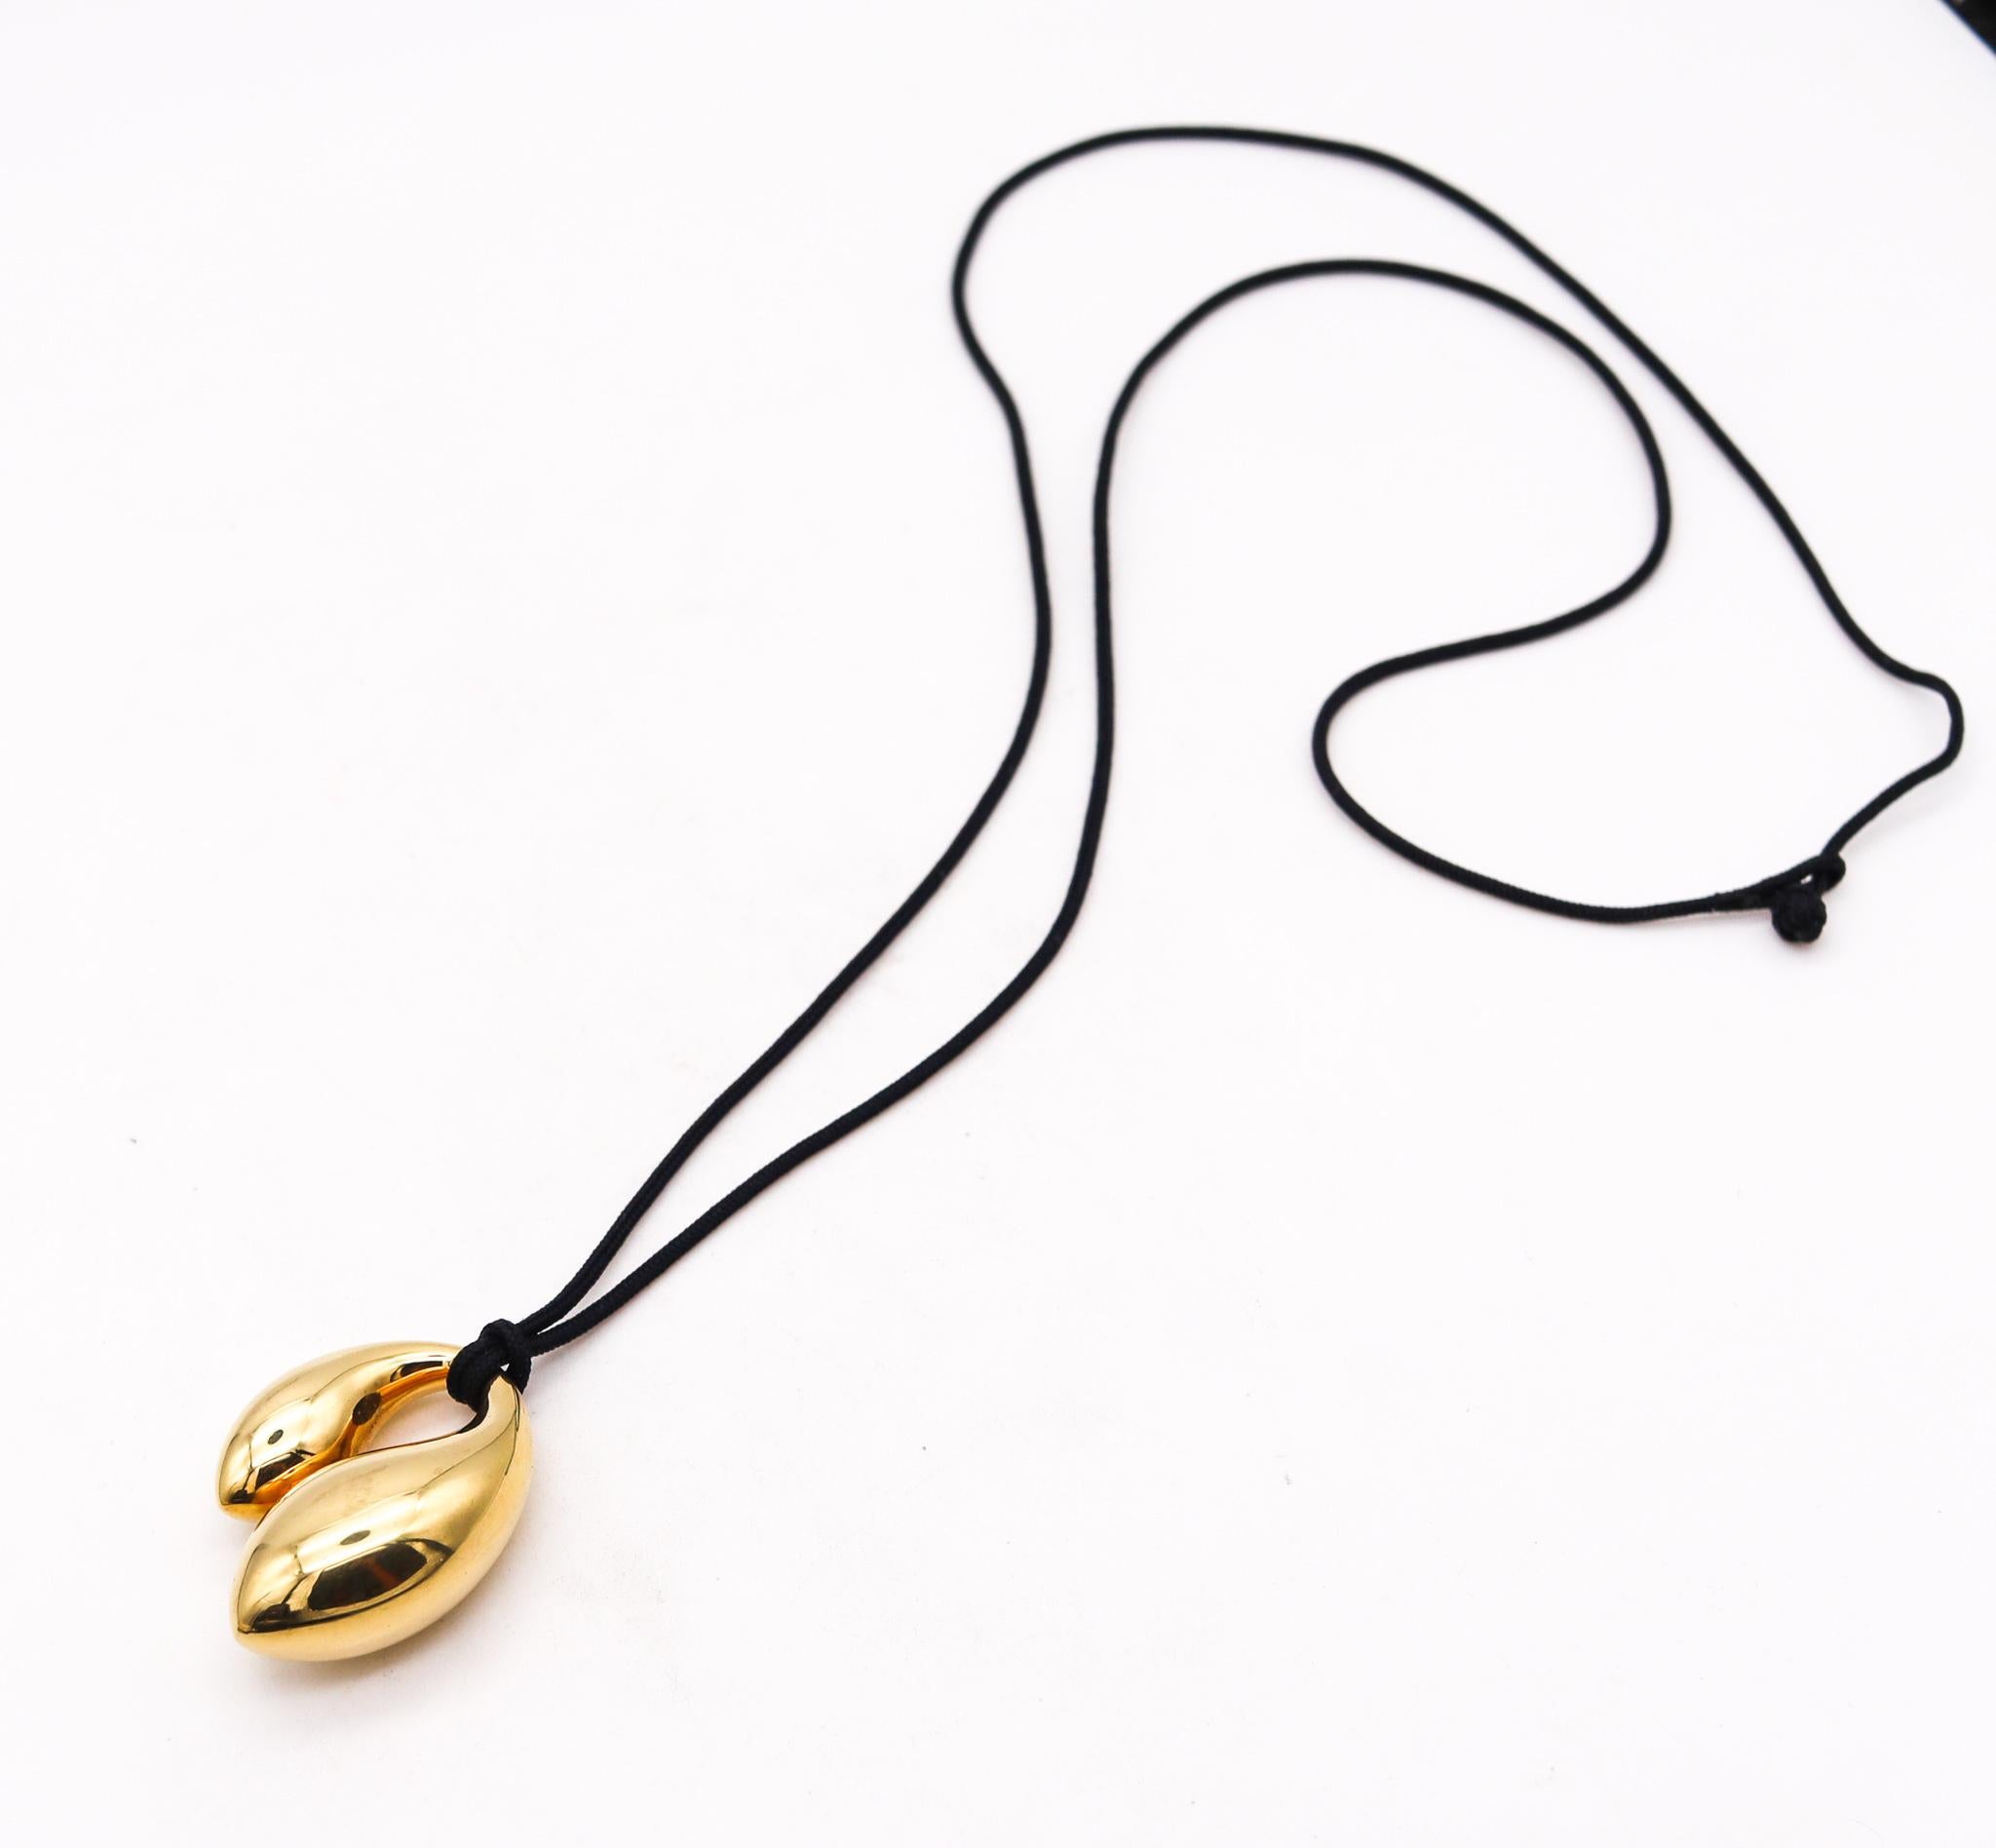 Double teardrop necklace designed by Elsa Peretti (1940-2019) for Tiffany & Co.

This iconic double teardrop is one of the most recognizable Peretti's designs of the late 1970's. This extra large pendant necklace has been crafted at the Tiffany